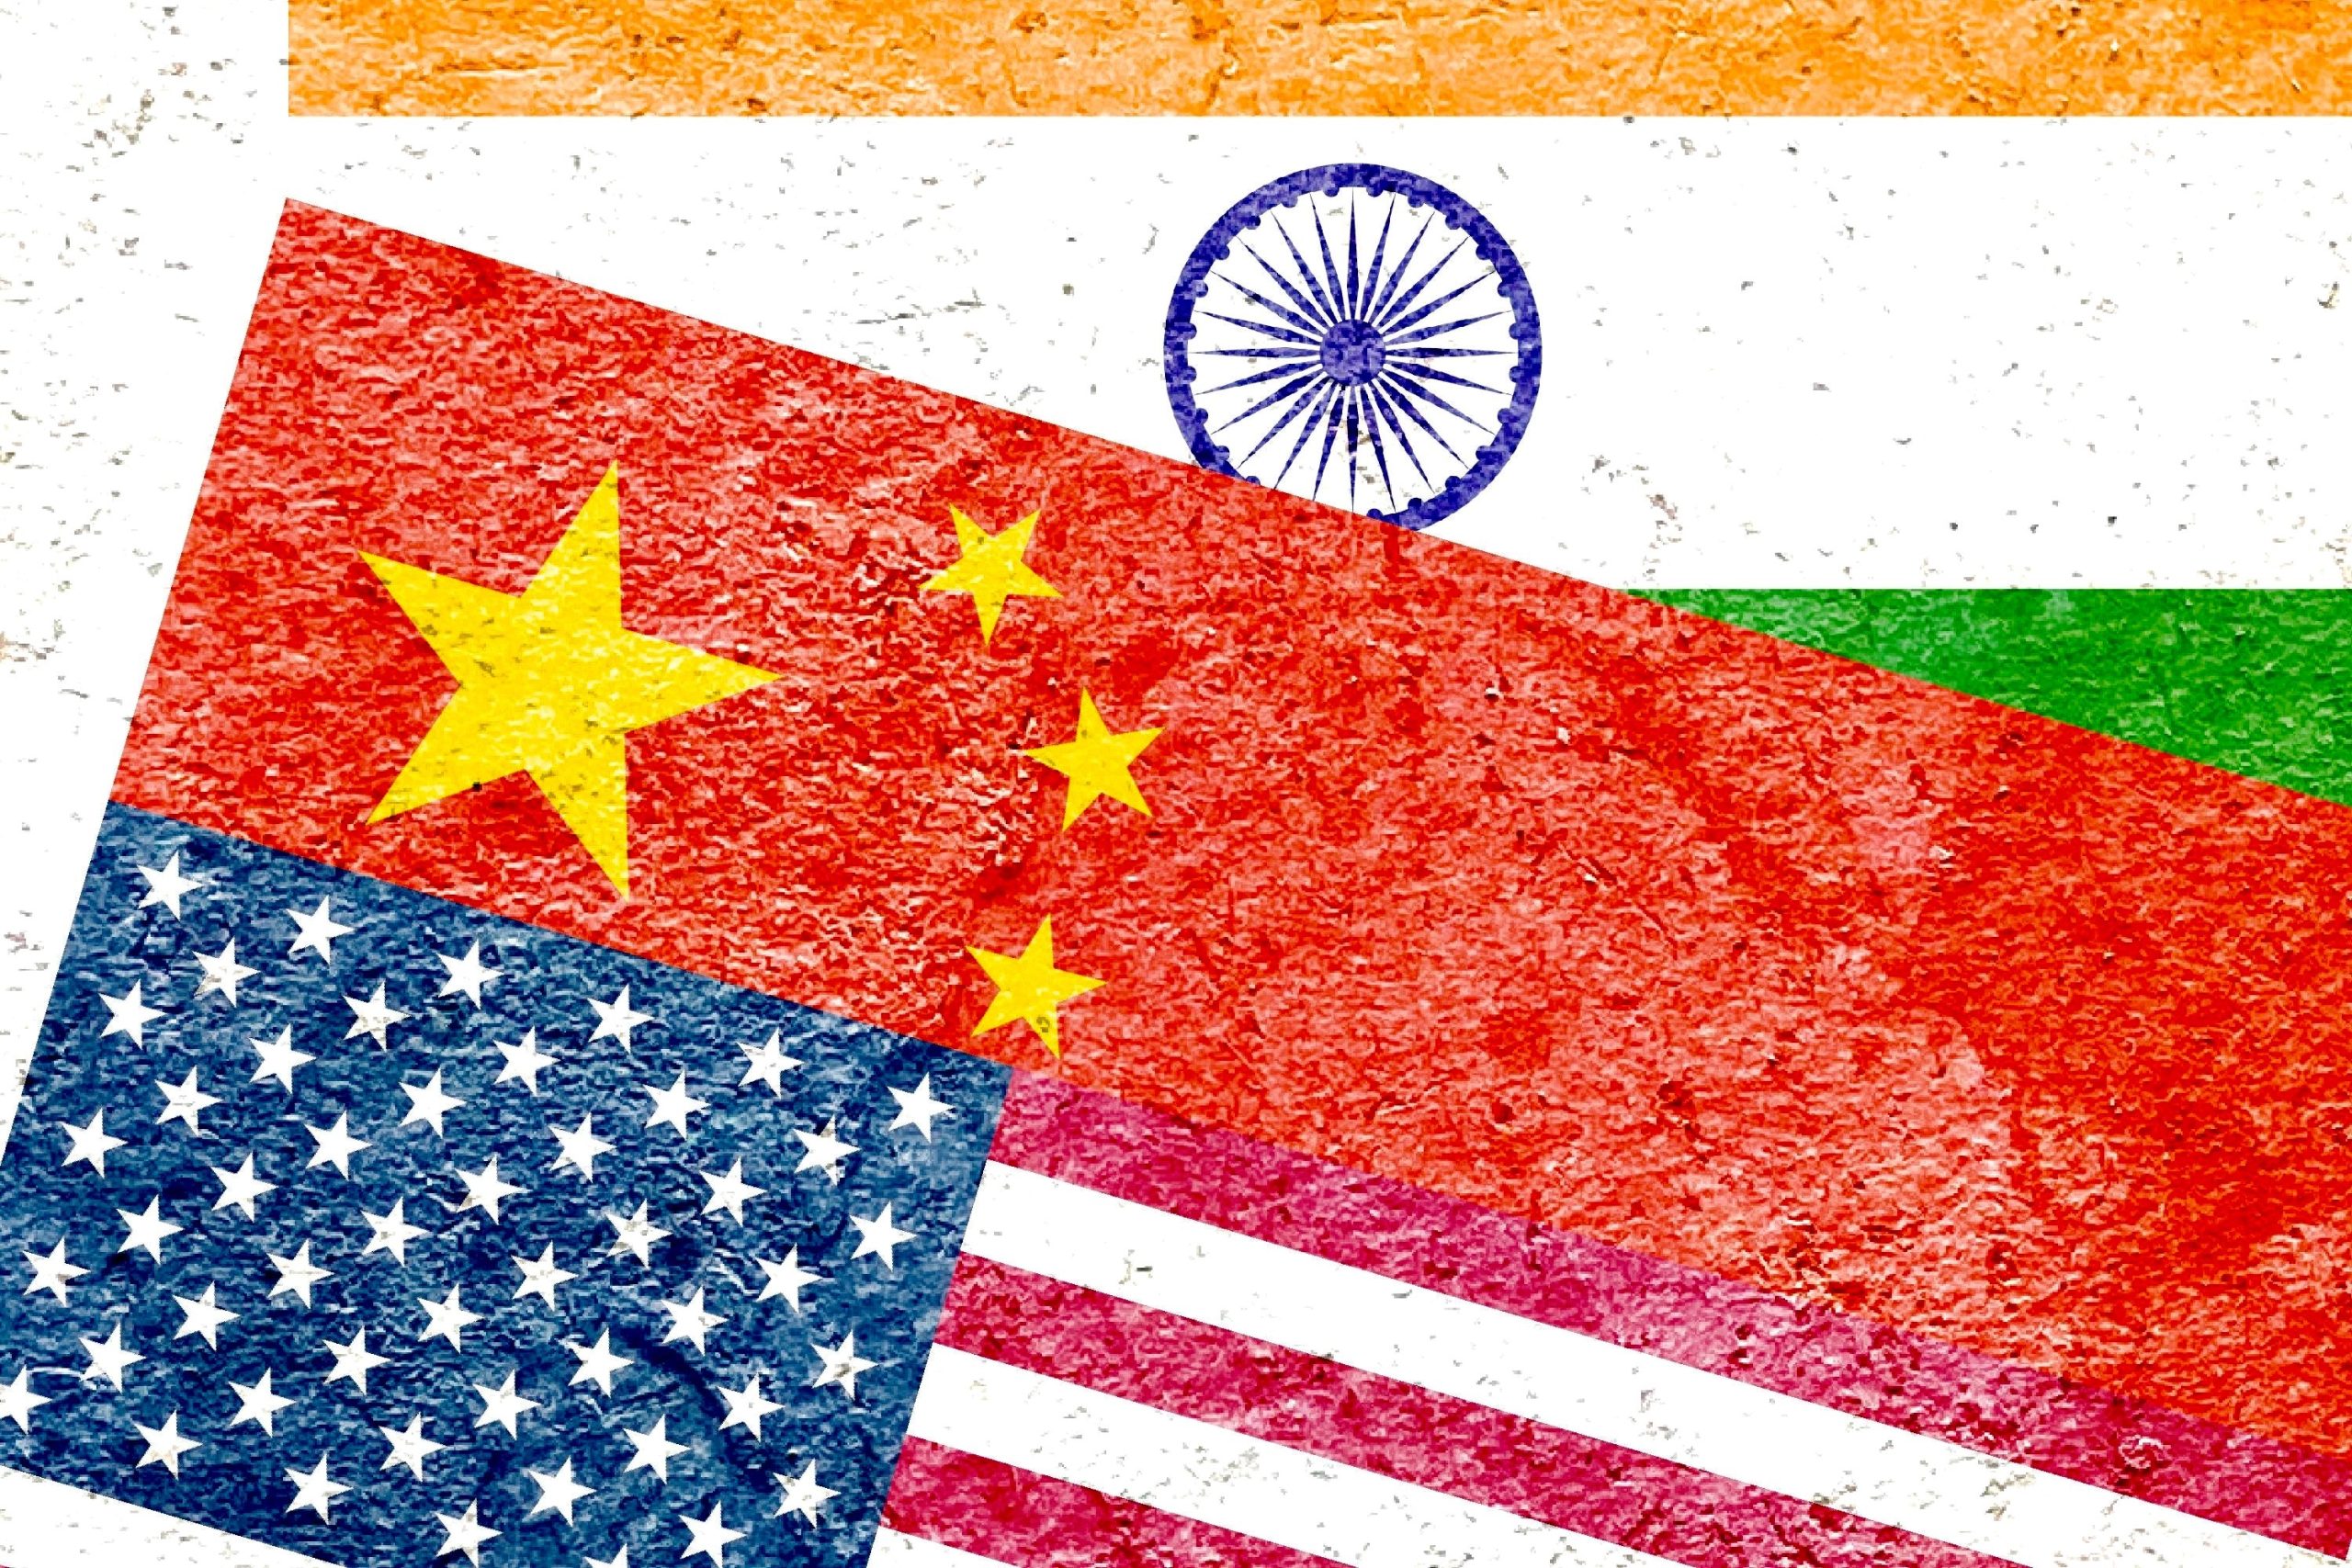 https://depositphotos.com/490016914/stock-photo-rendering-flags-china-india-together.html